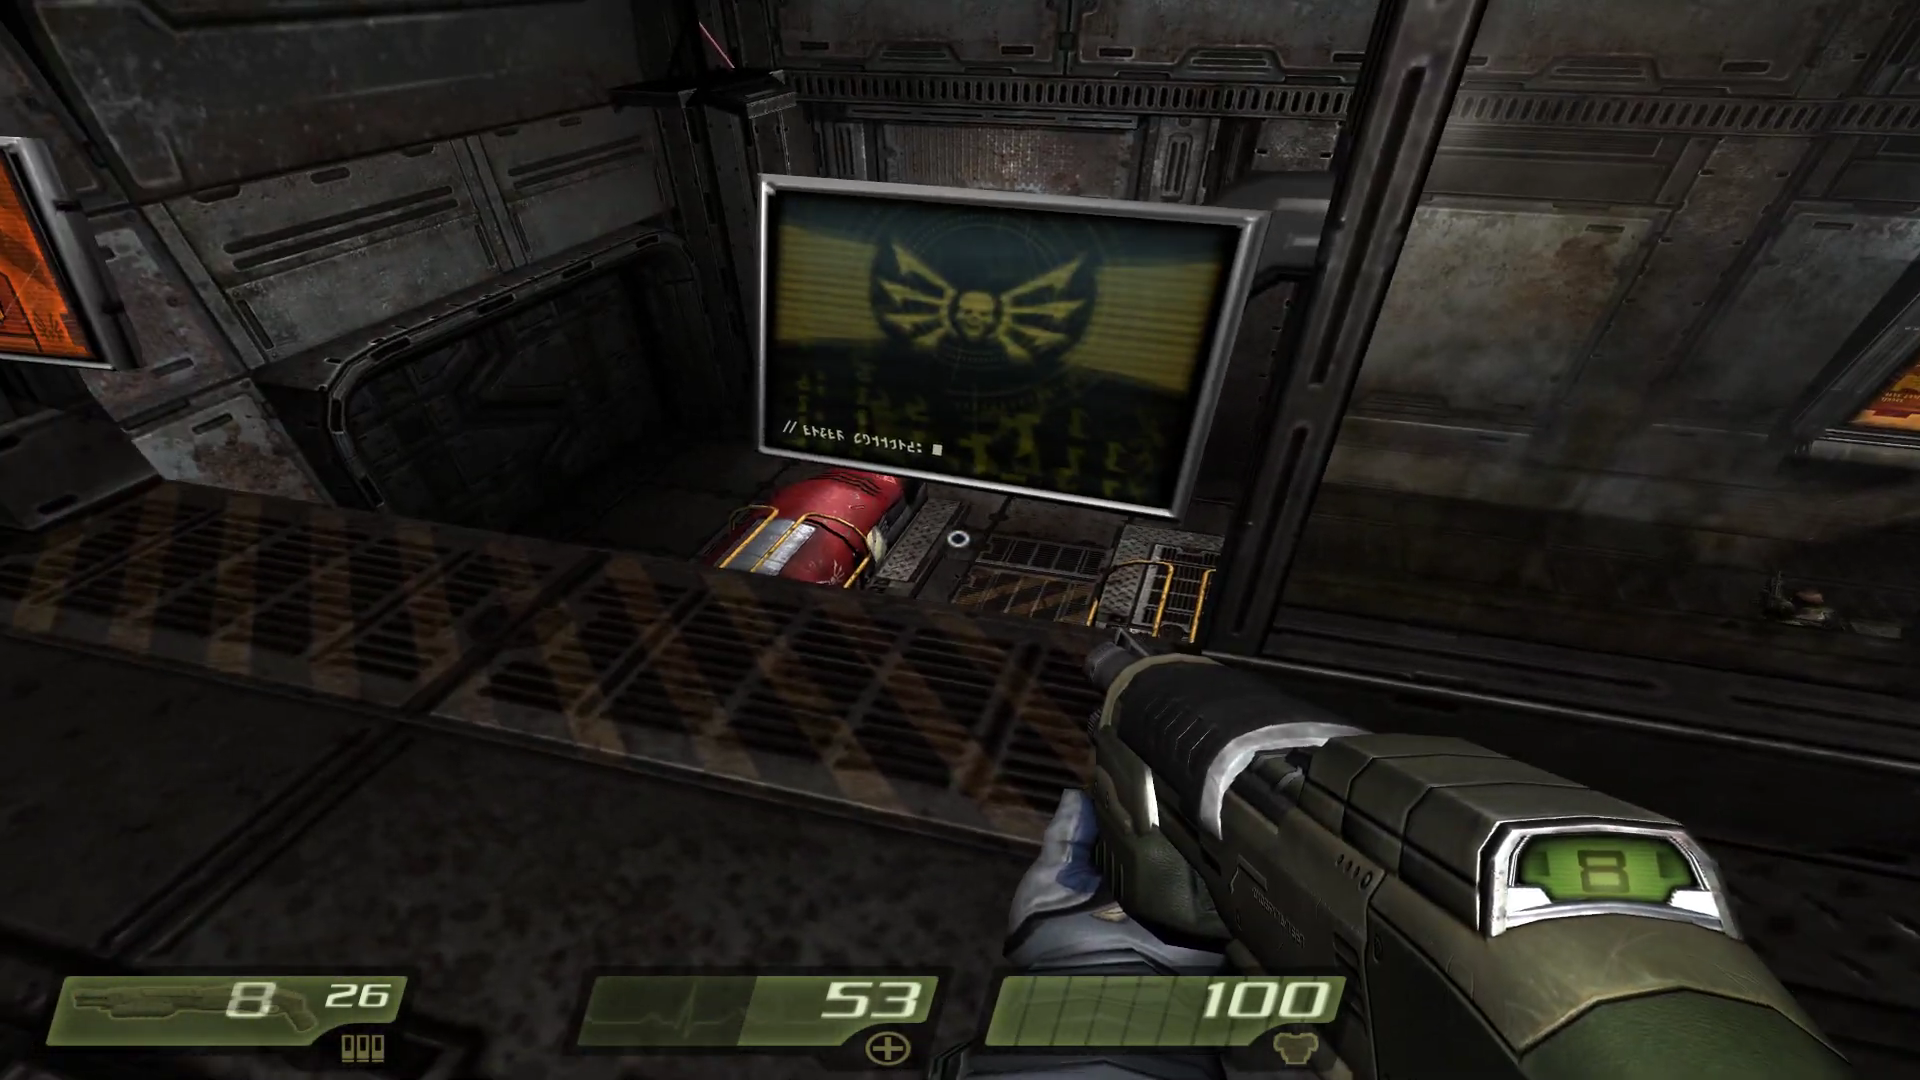 Media asset in full size related to 3dfxzone.it news item entitled as follows: YouTube Gameplay: Quake 4 | 1080p | 8x anti-aliasing & 16x aniso | id Tech 4 | Image Name: news34761_Quake-4_Gameplay_Footage_1.png